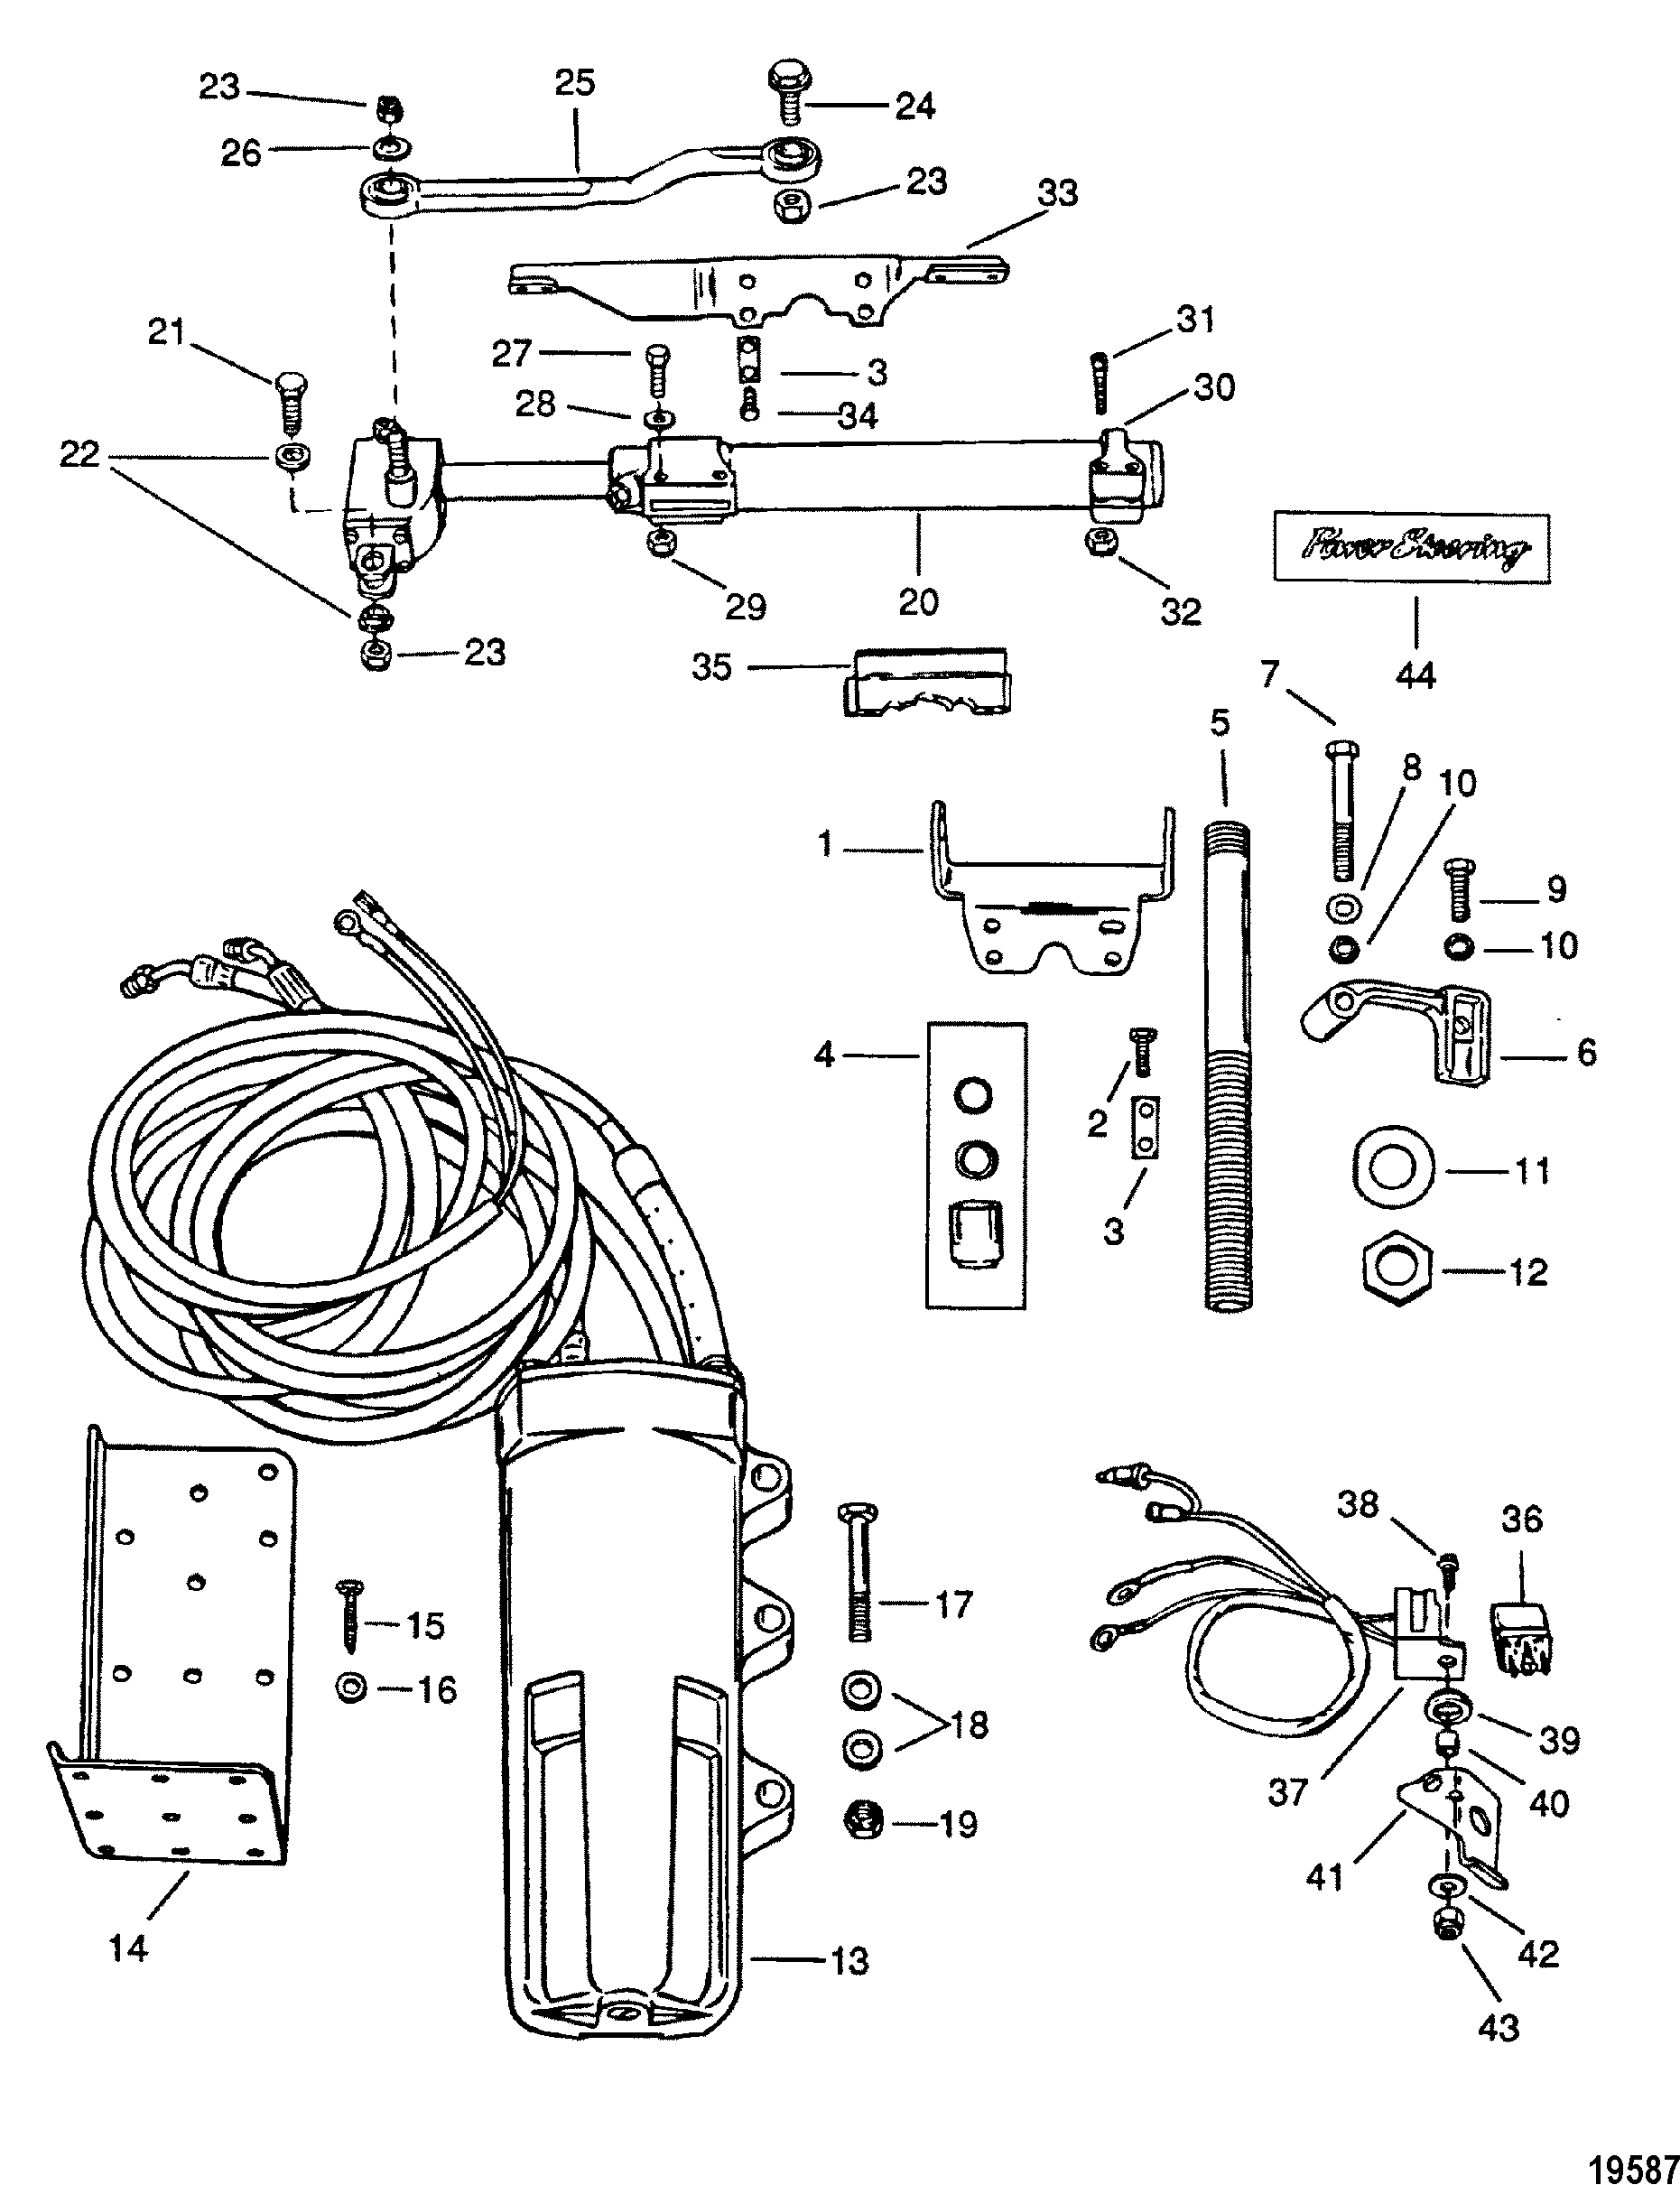 POWER STEERING COMPONENTS(REMOTE)